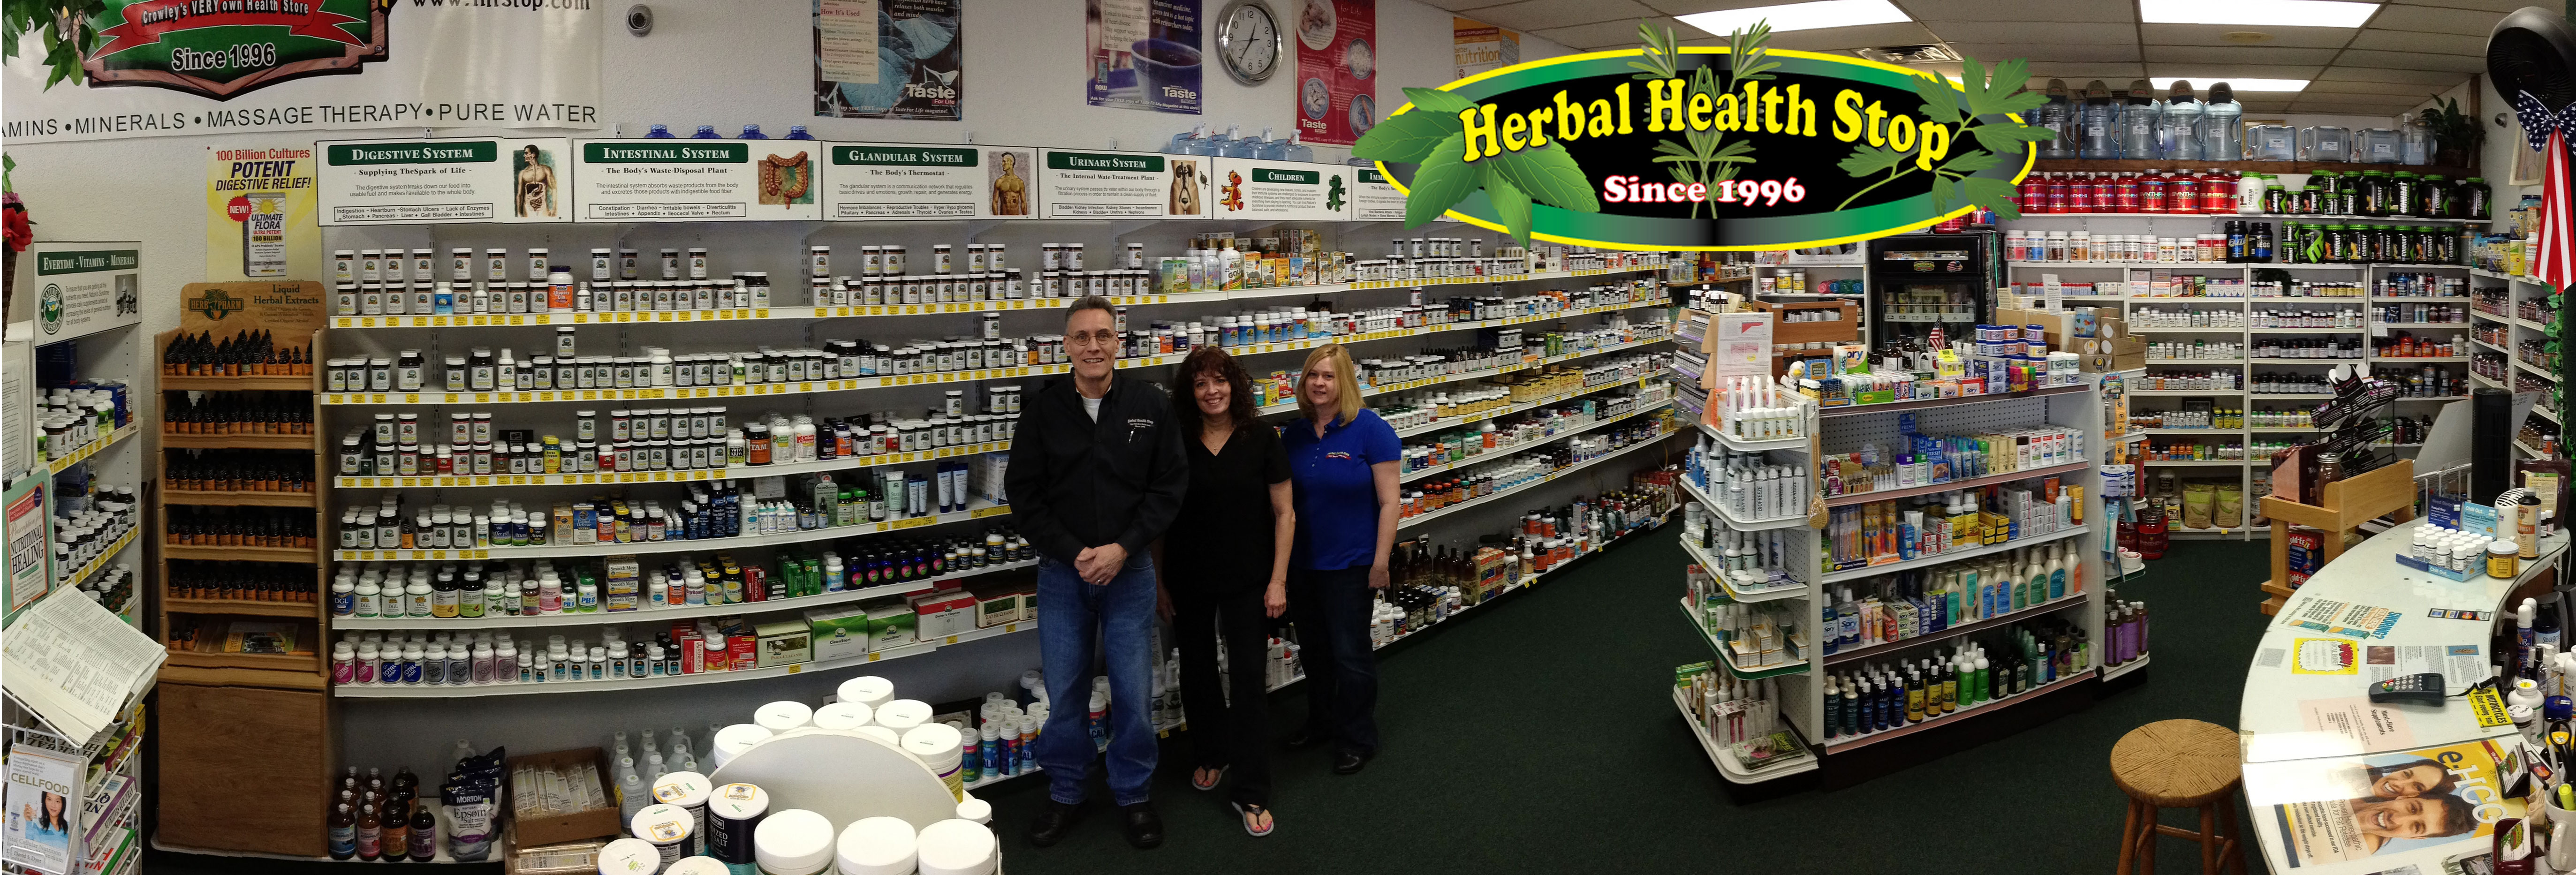 South of Fort Worth in Crowley Herbal Health Store